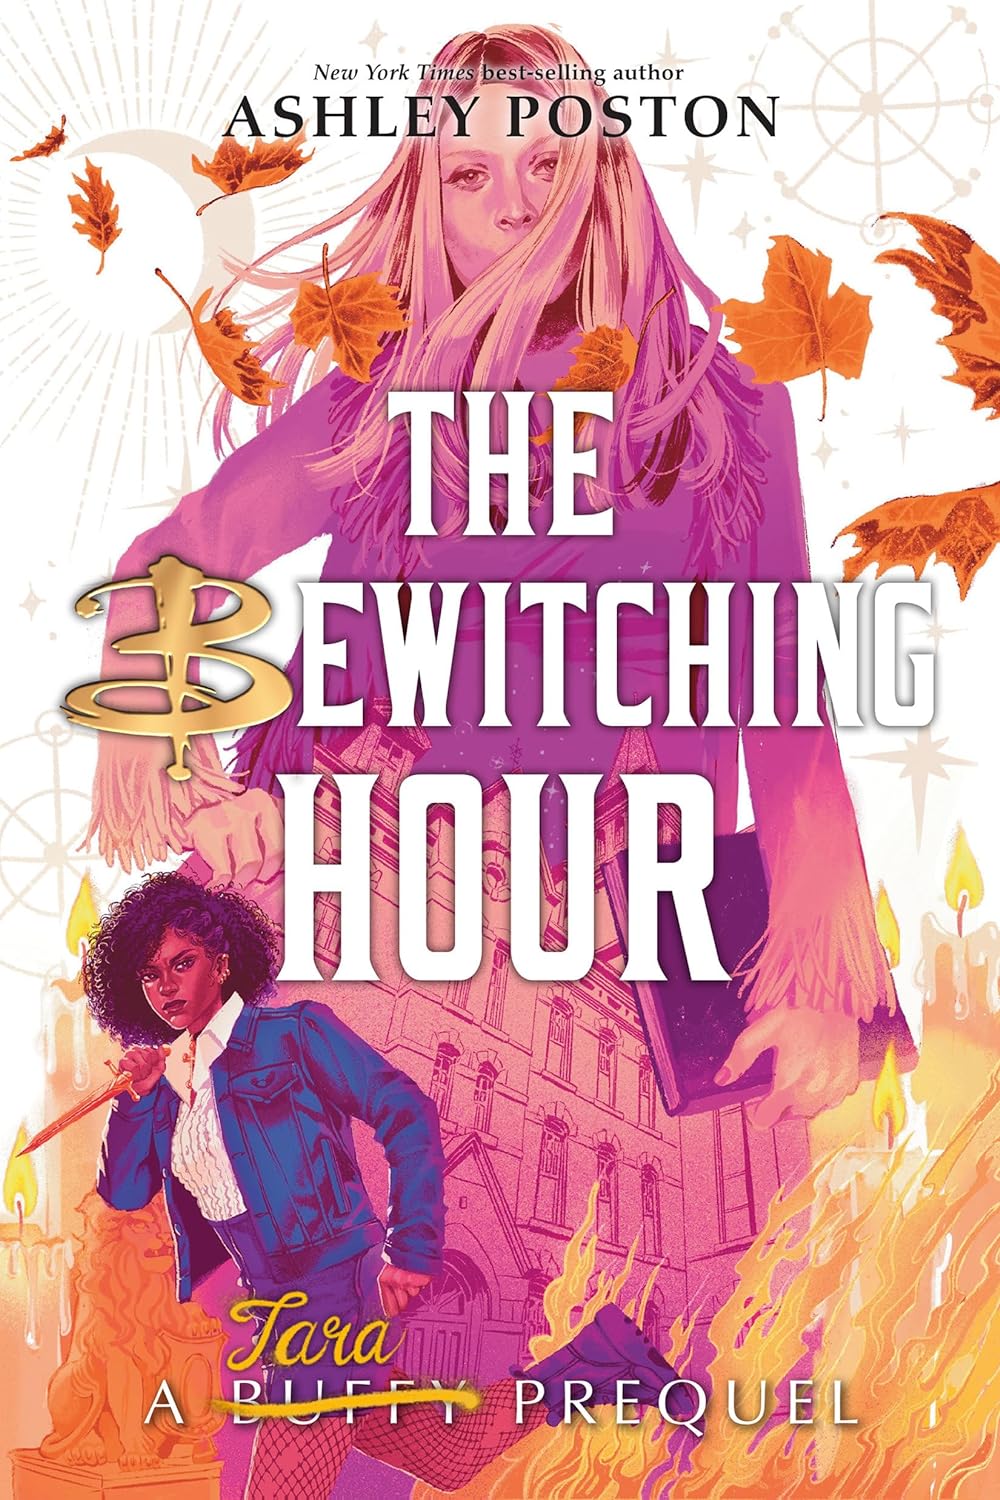 The Bewitching Hour [Ashley Poston]